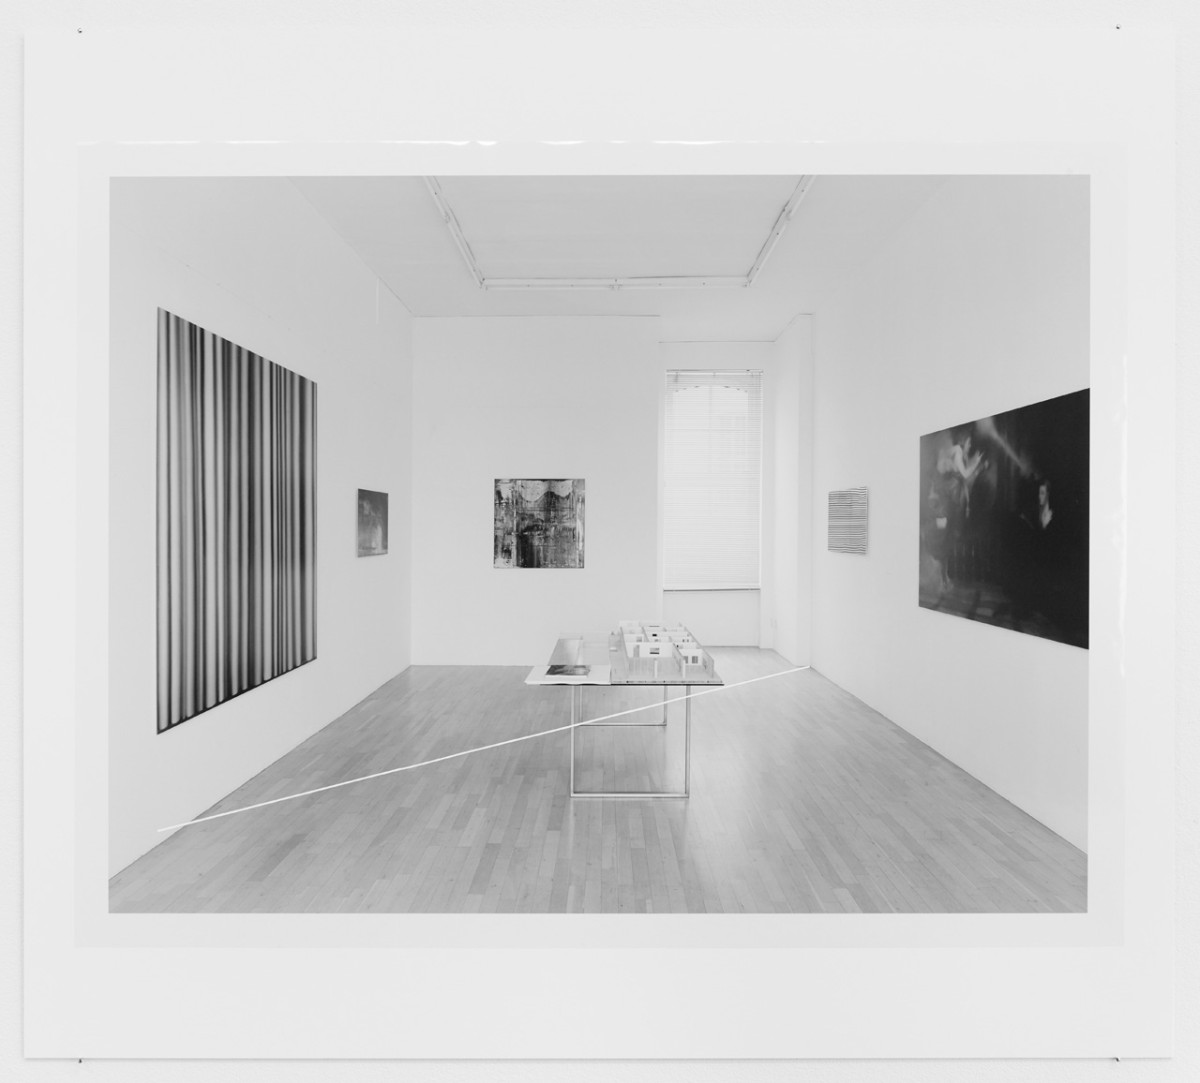 Case Study #1: Notations for Galerie Heiner Friedrich, Koln, 1976 (not executed) by Fred Sandback - Black and white inkjet print on archival paper mounted on aluminium, acryl on transparency